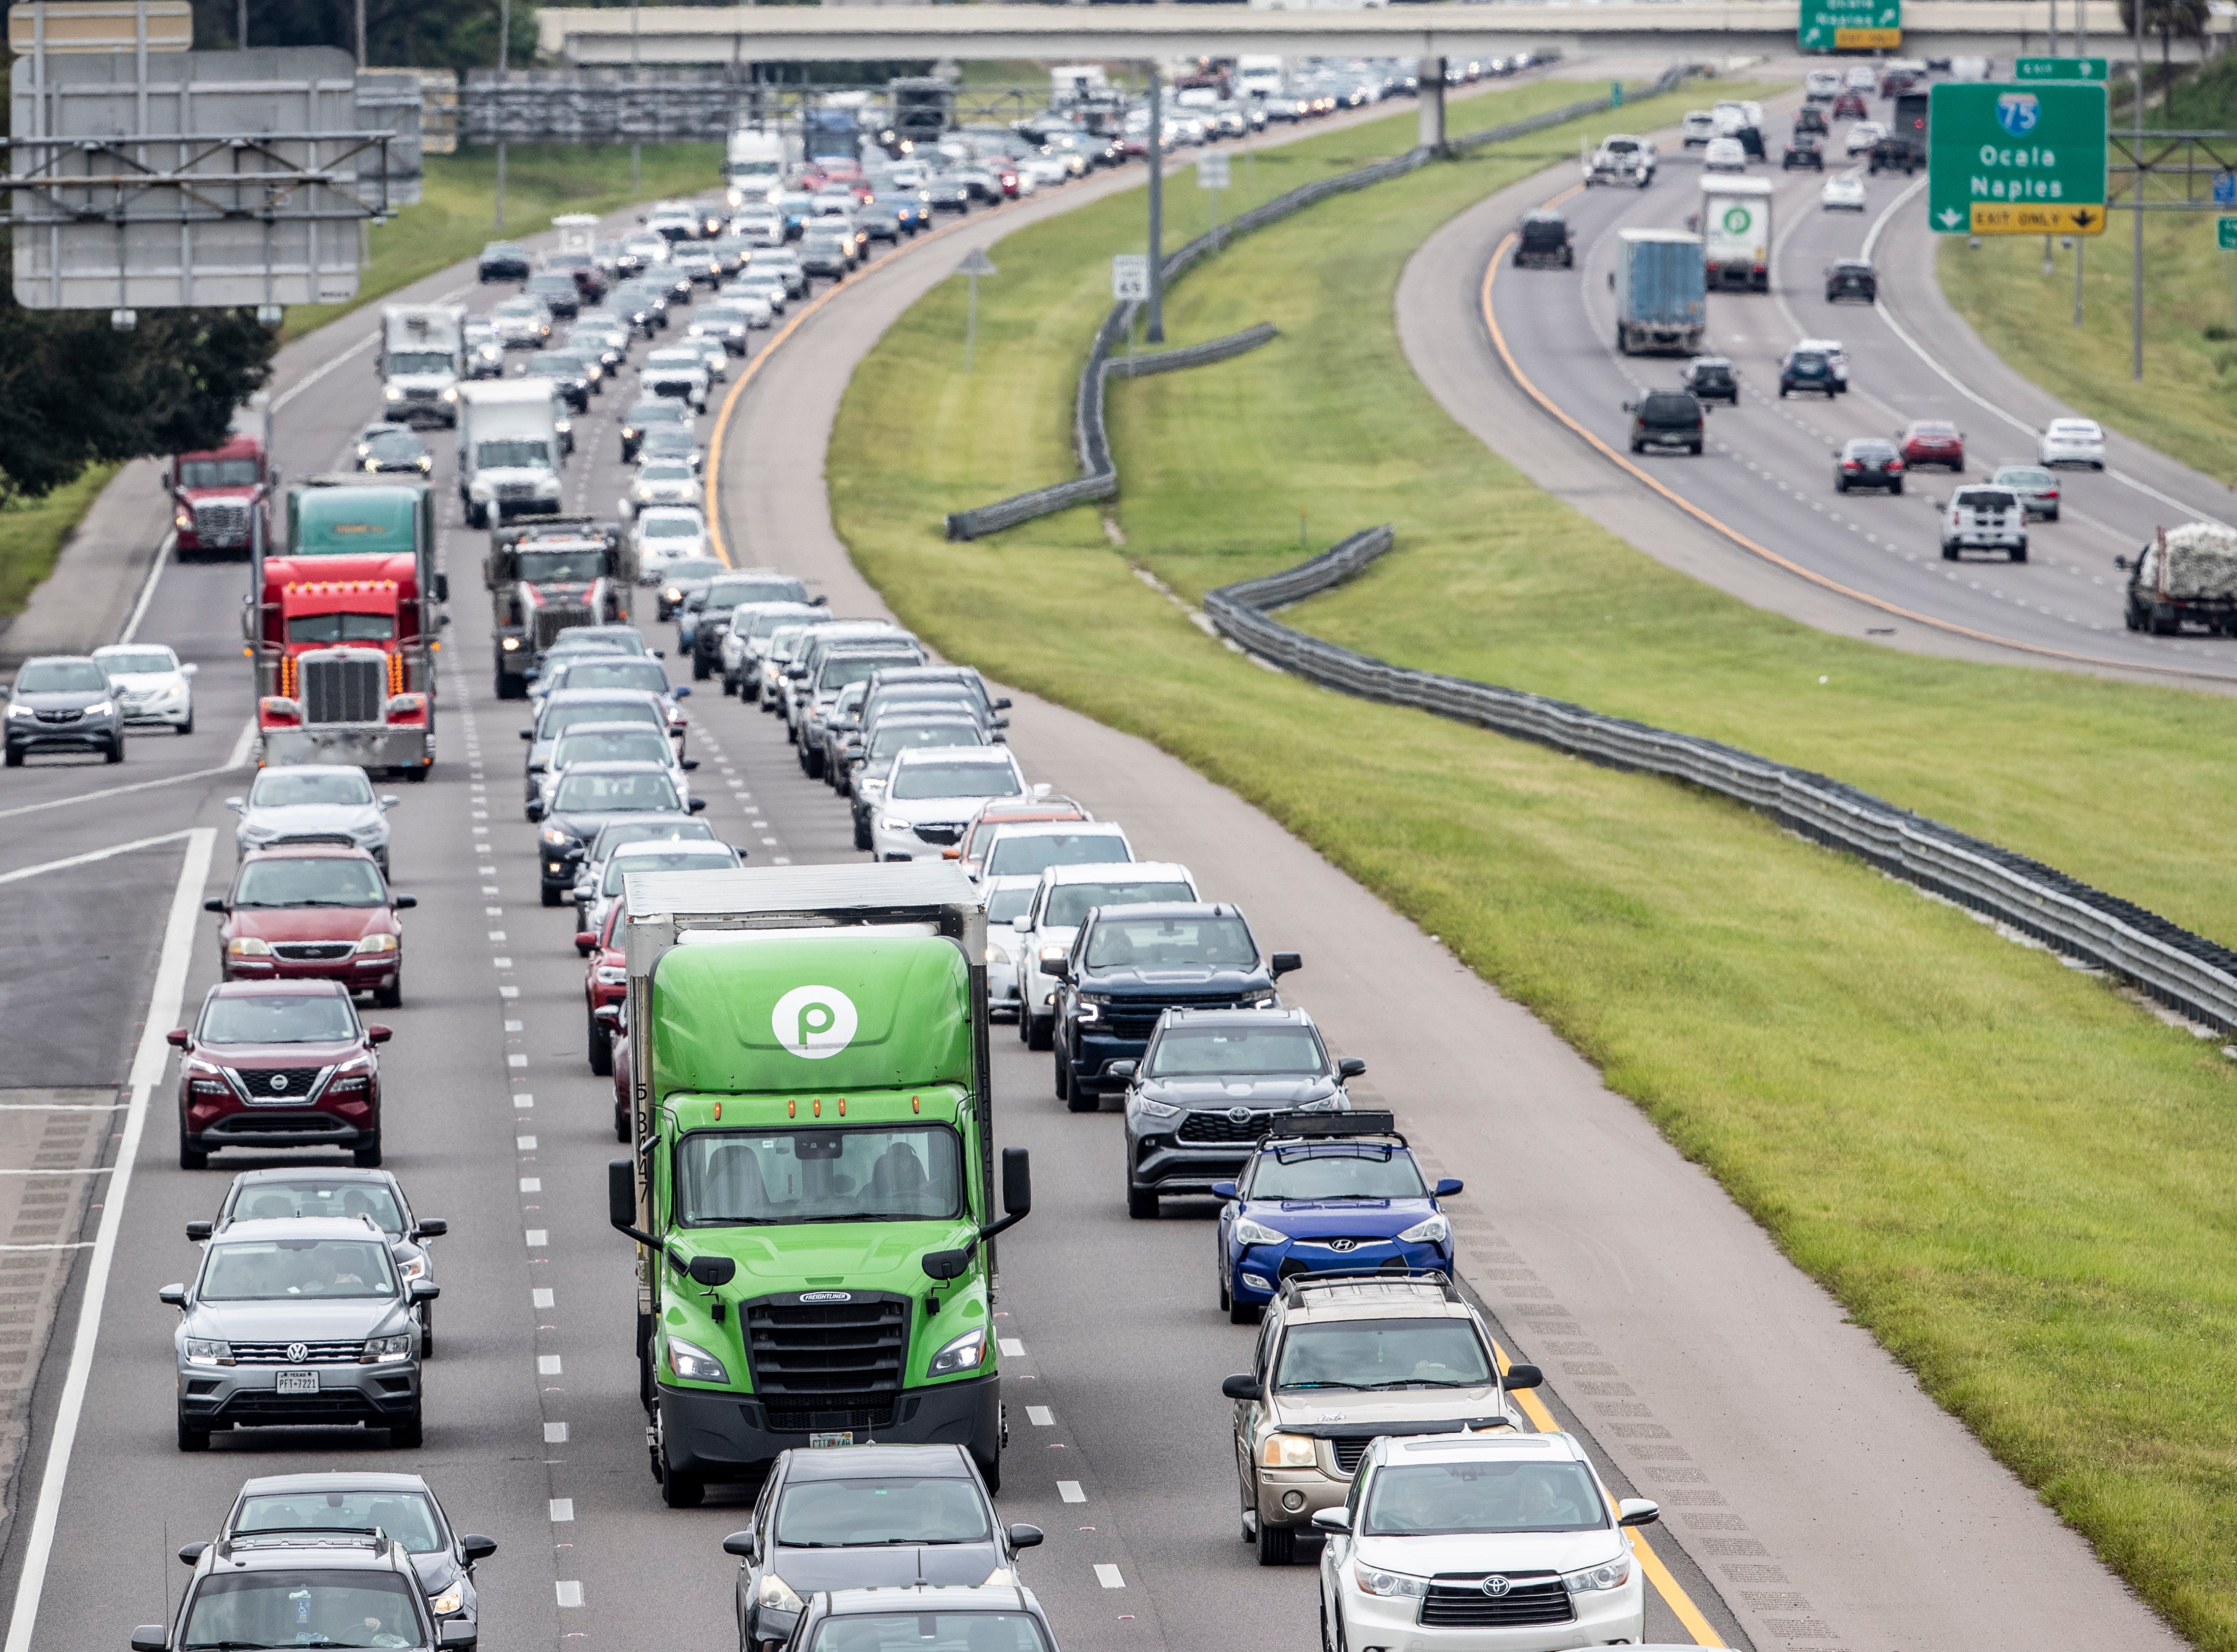 Traffic builds along Interstate 4 in Tampa, Fla., Tuesday, Sept. 27, 2022, as Hurricane Ian approaches. (Willie J. Allen Jr./Orlando Sentinel via AP)